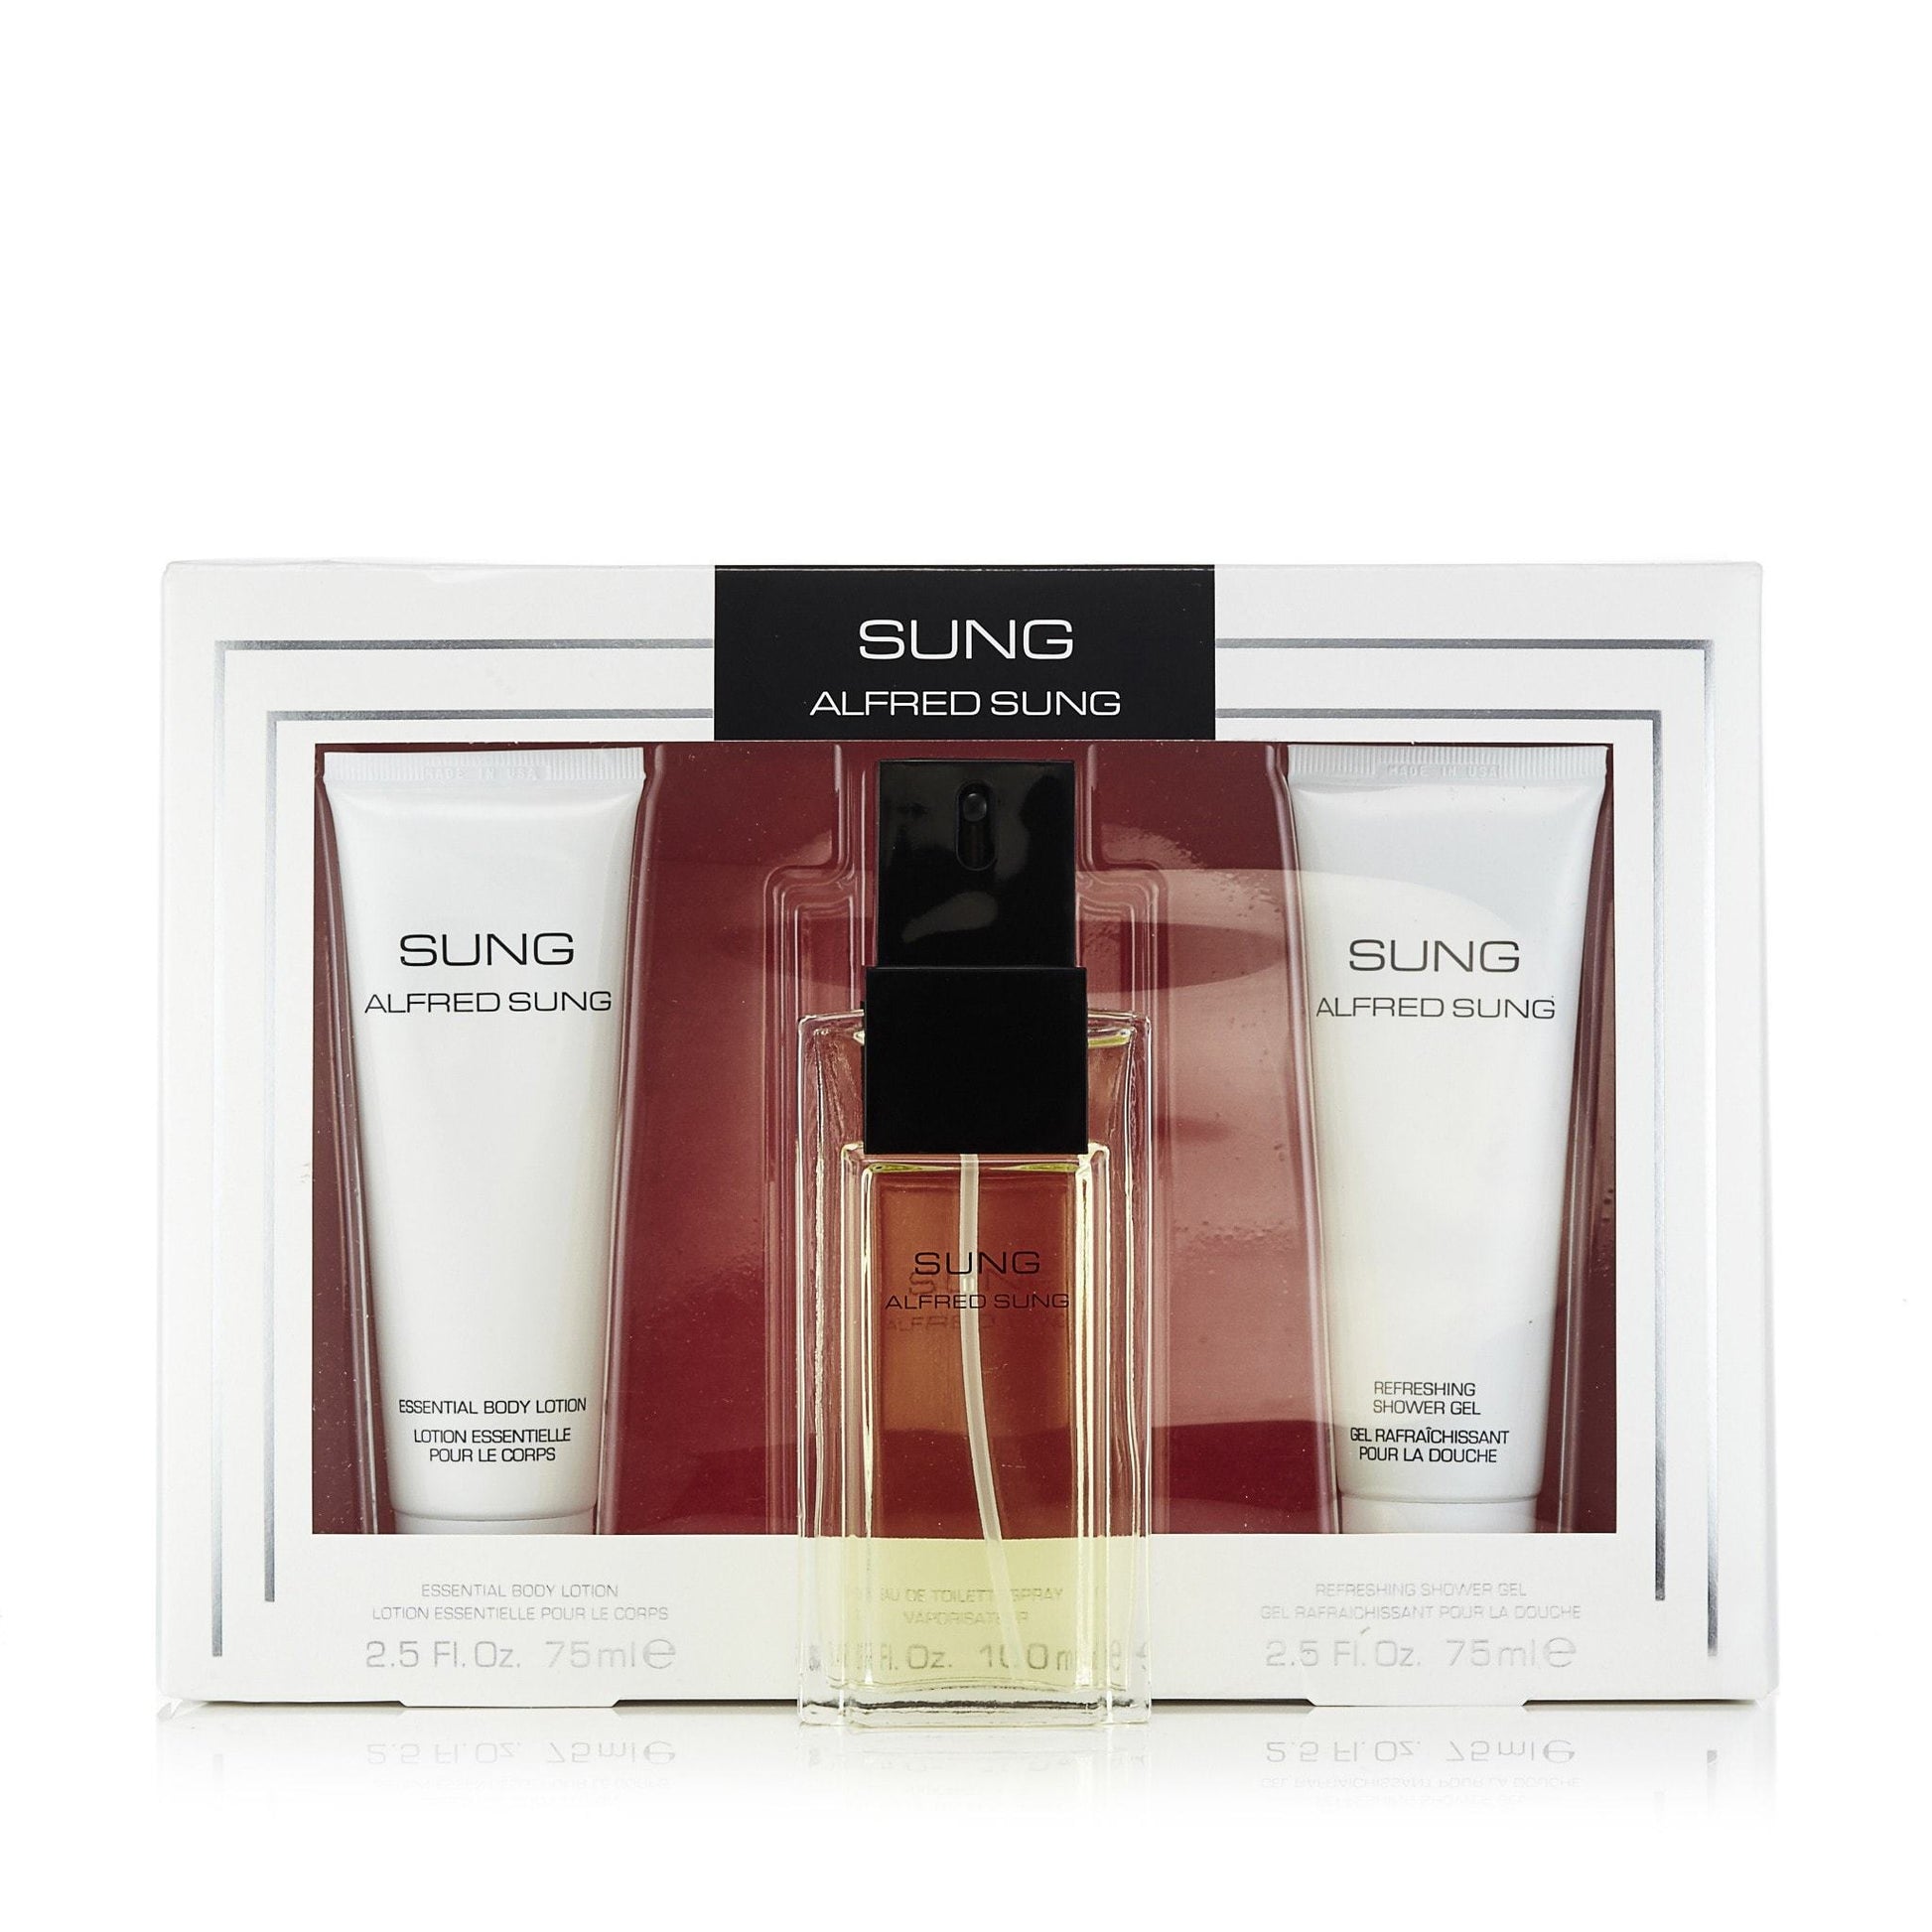 Alfred Sung Gift Set for Women by Alfred Sung, Product image 2